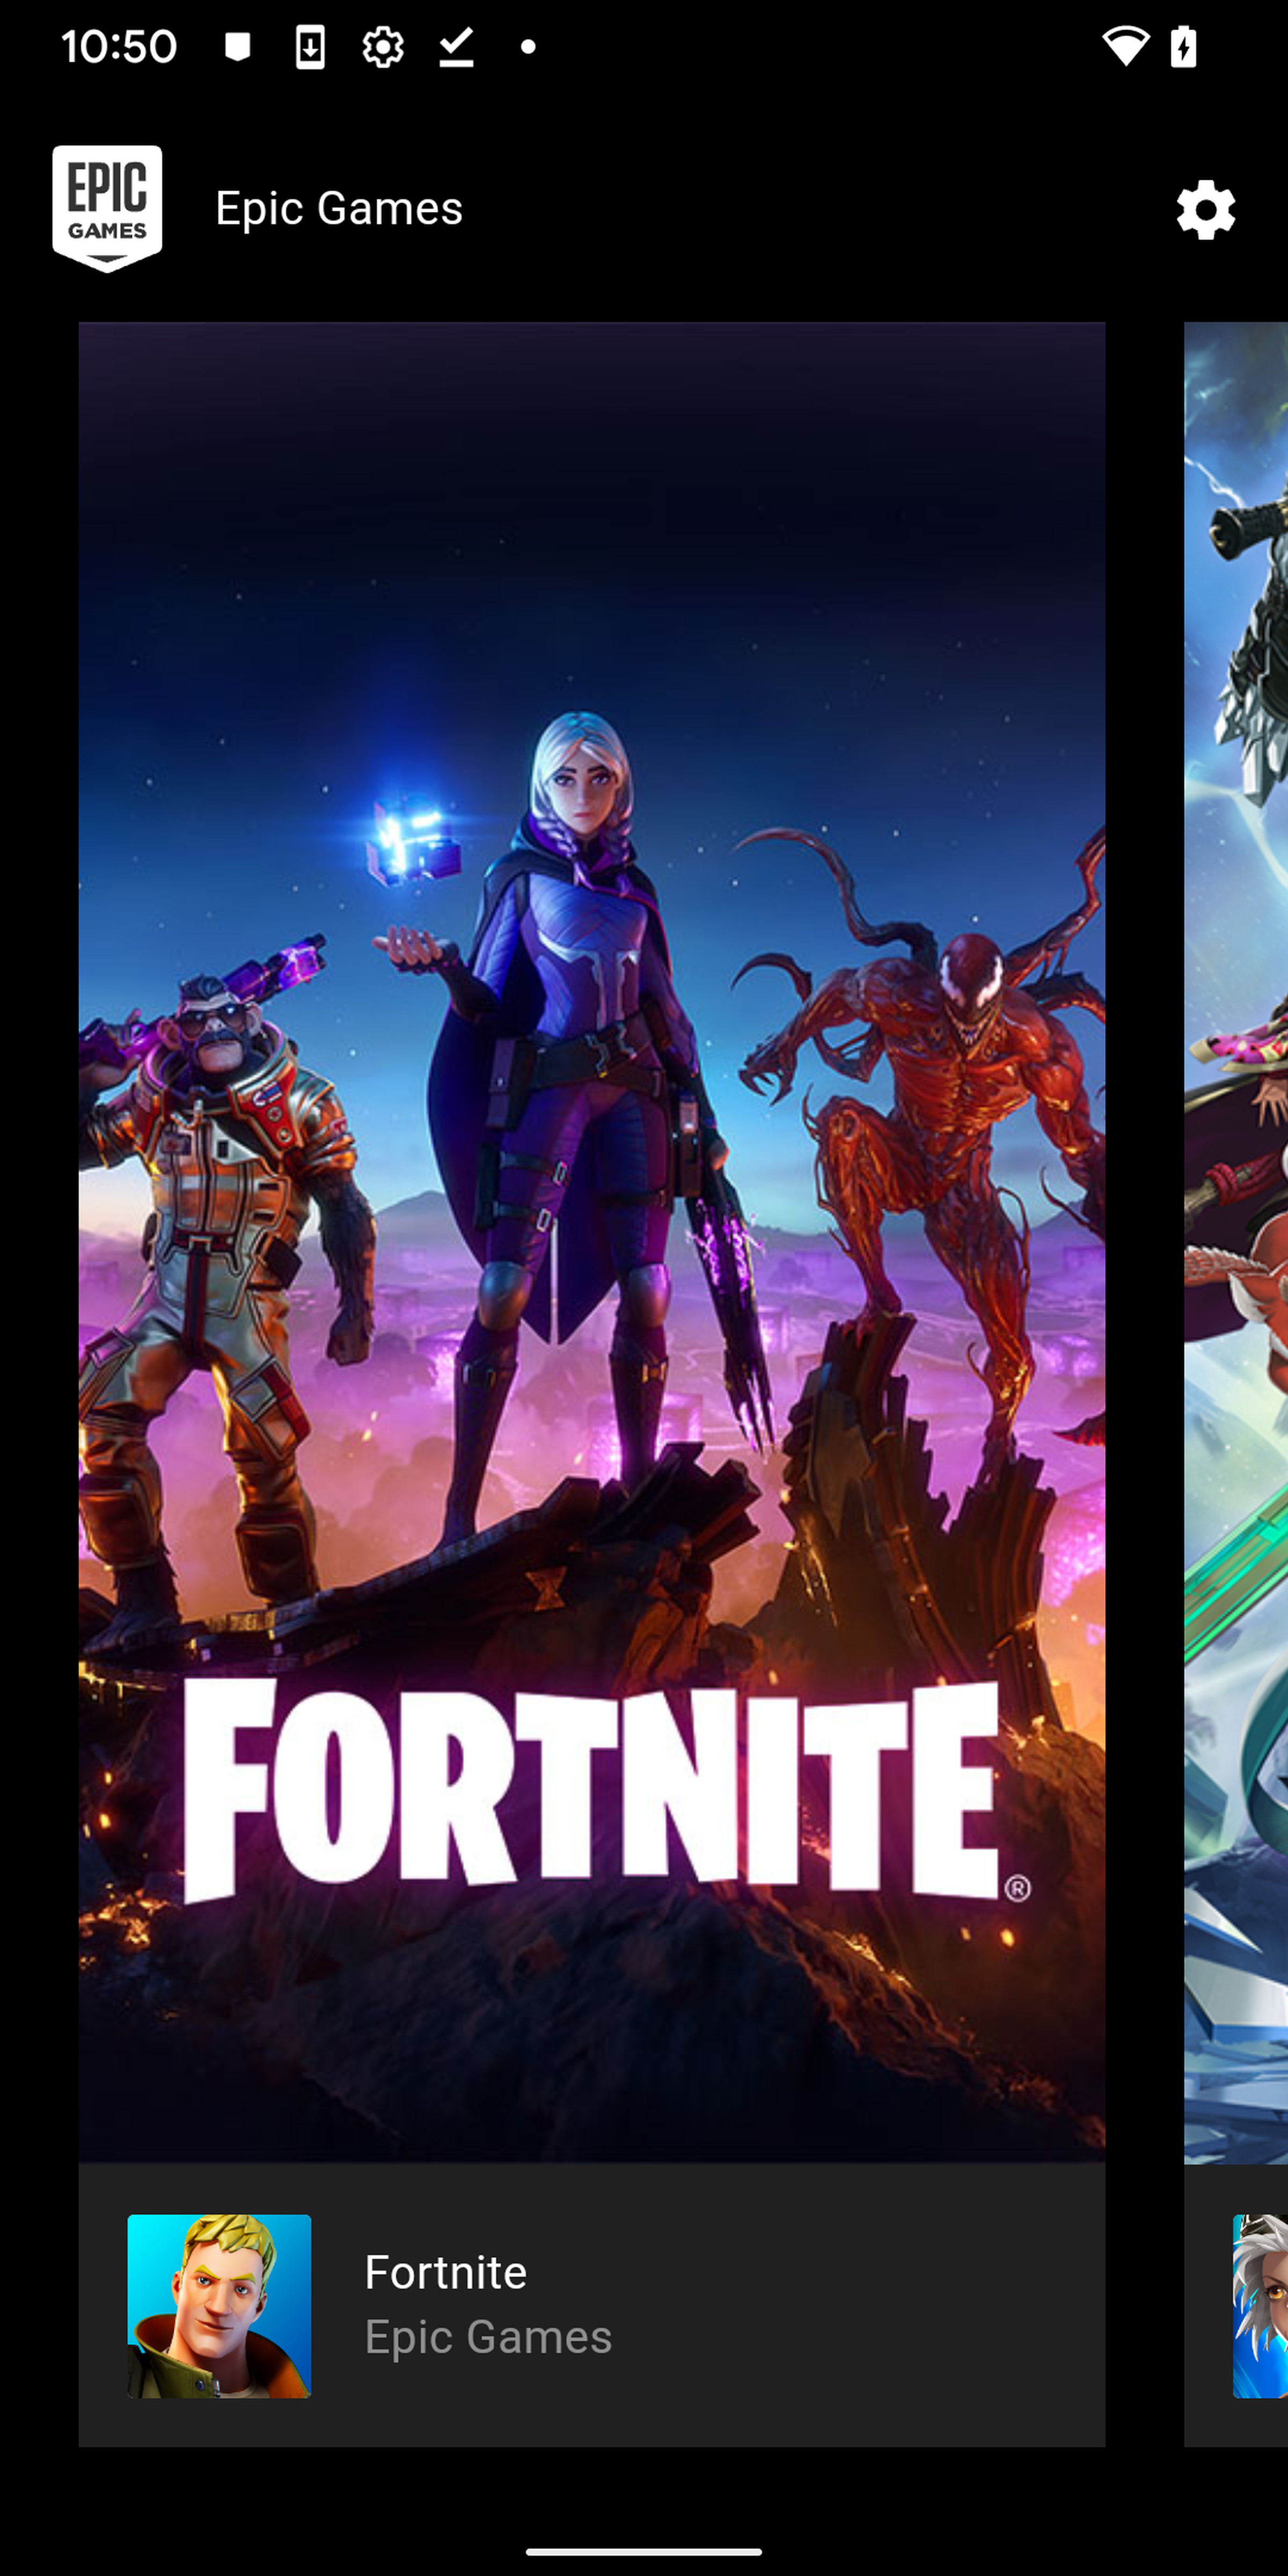 Open the installer and tap the Fortnite graphic.